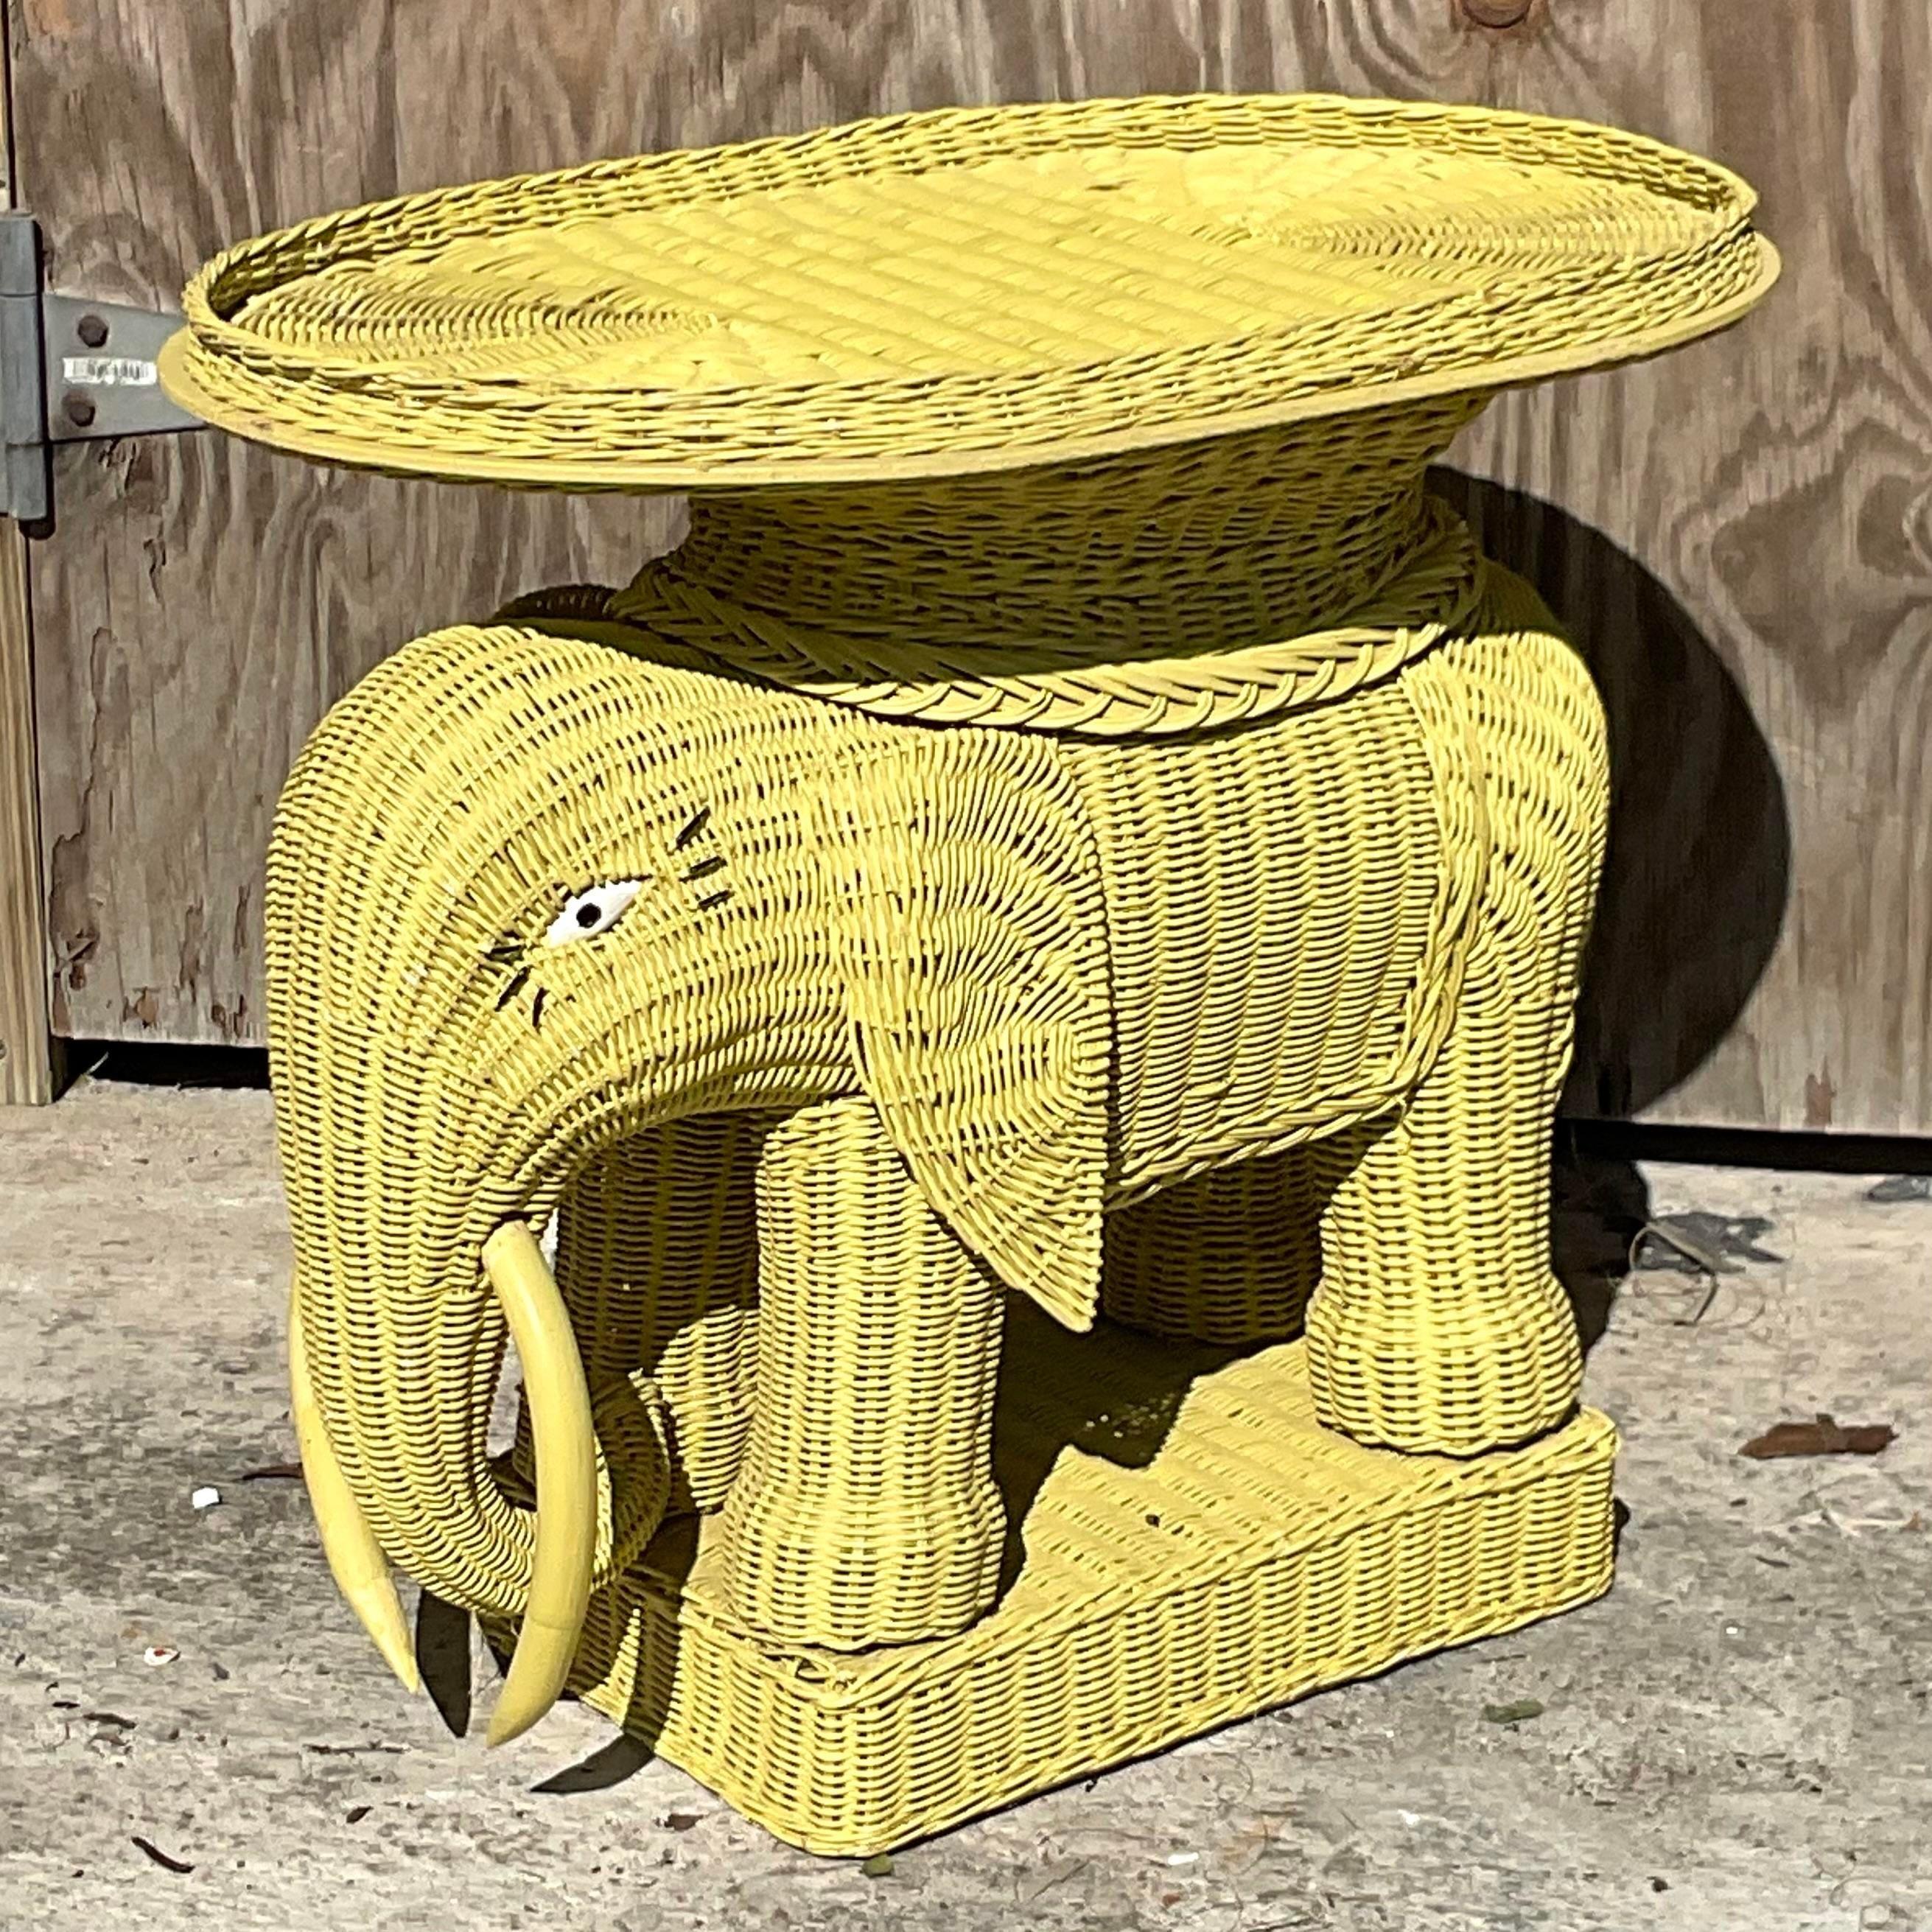 A fabulous vintage Coastal drinks table. A classic woven rattan elephant with a removable tray on top. Painted a brilliant green with a charming set of eyelashes. Acquired from a Palm Beach estate.